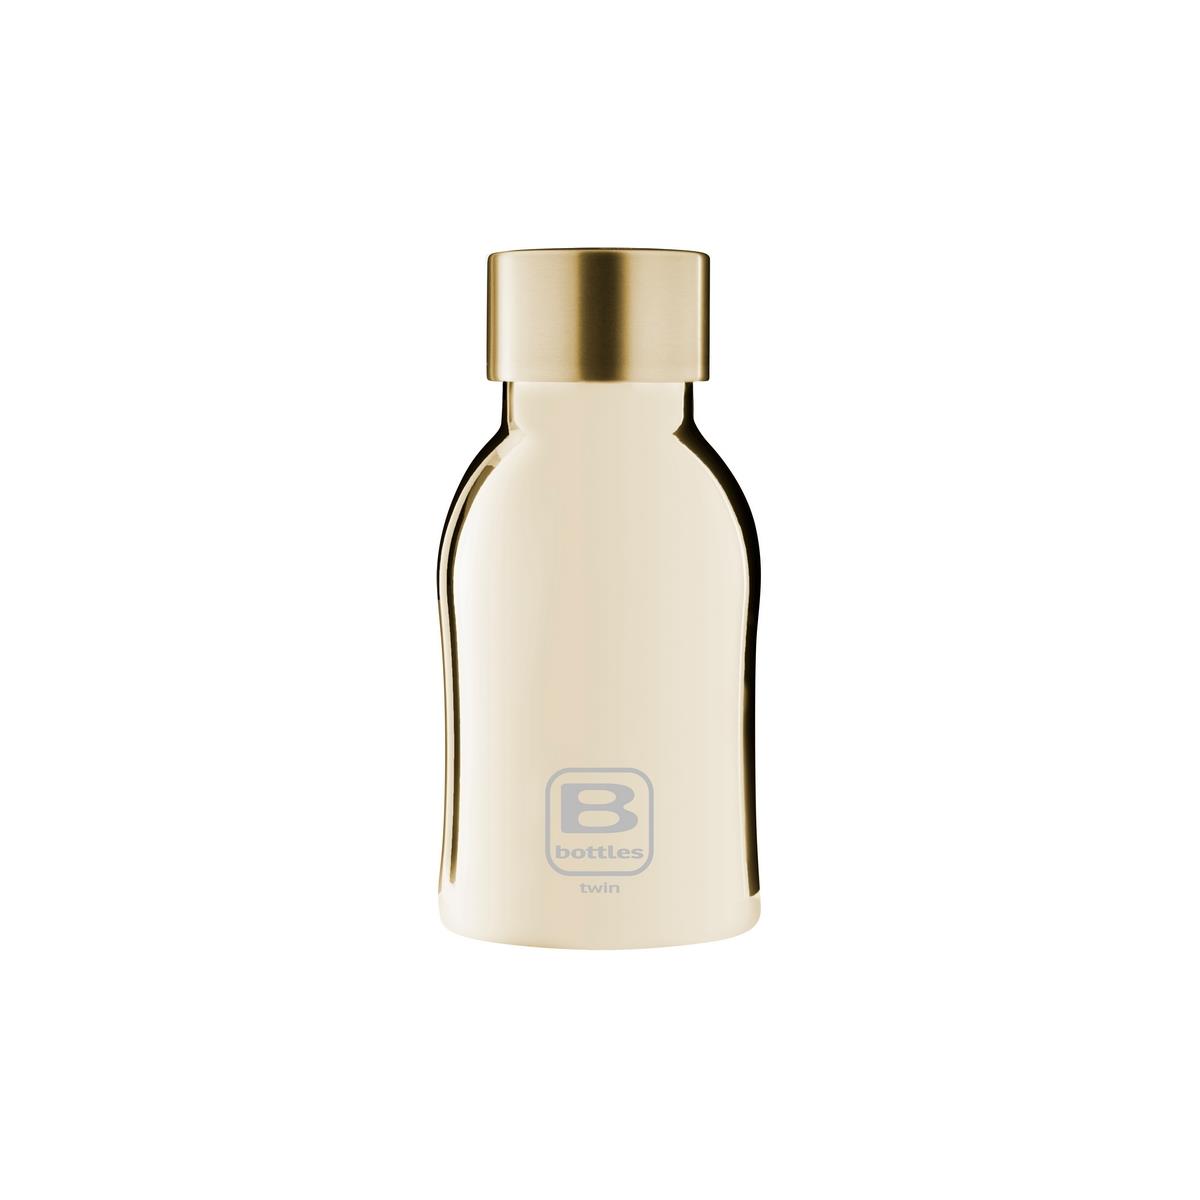 photo B Bottles Twin - Yellow Gold Lux ??- 250 ml - Double wall thermal bottle in 18/10 stainless steel